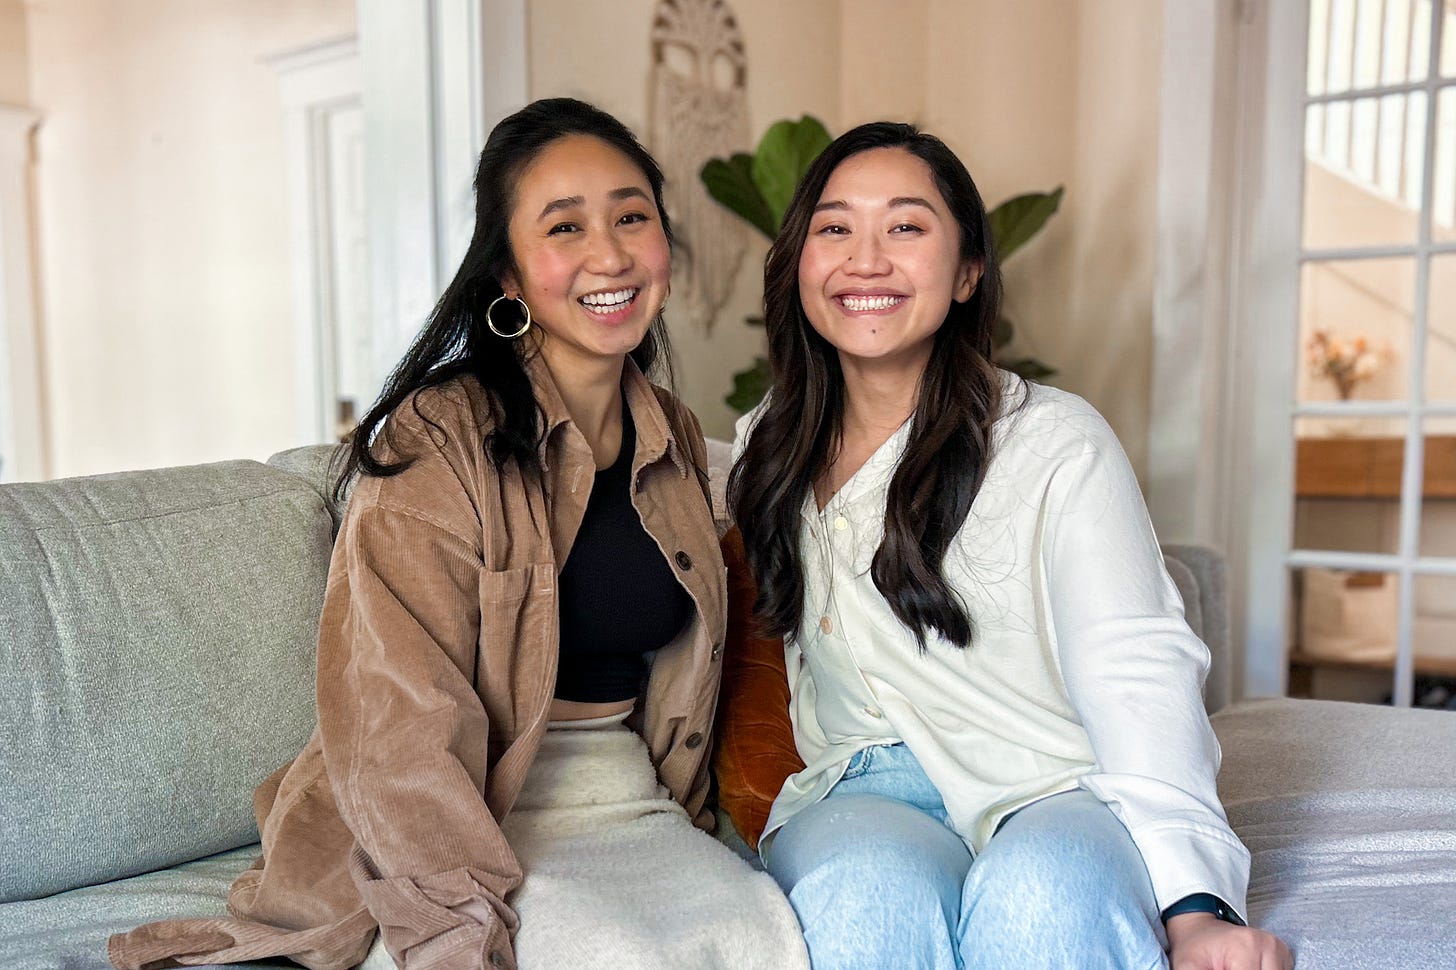 Two woman both with long, dark hair sitting on a couch and laughing towards the camera